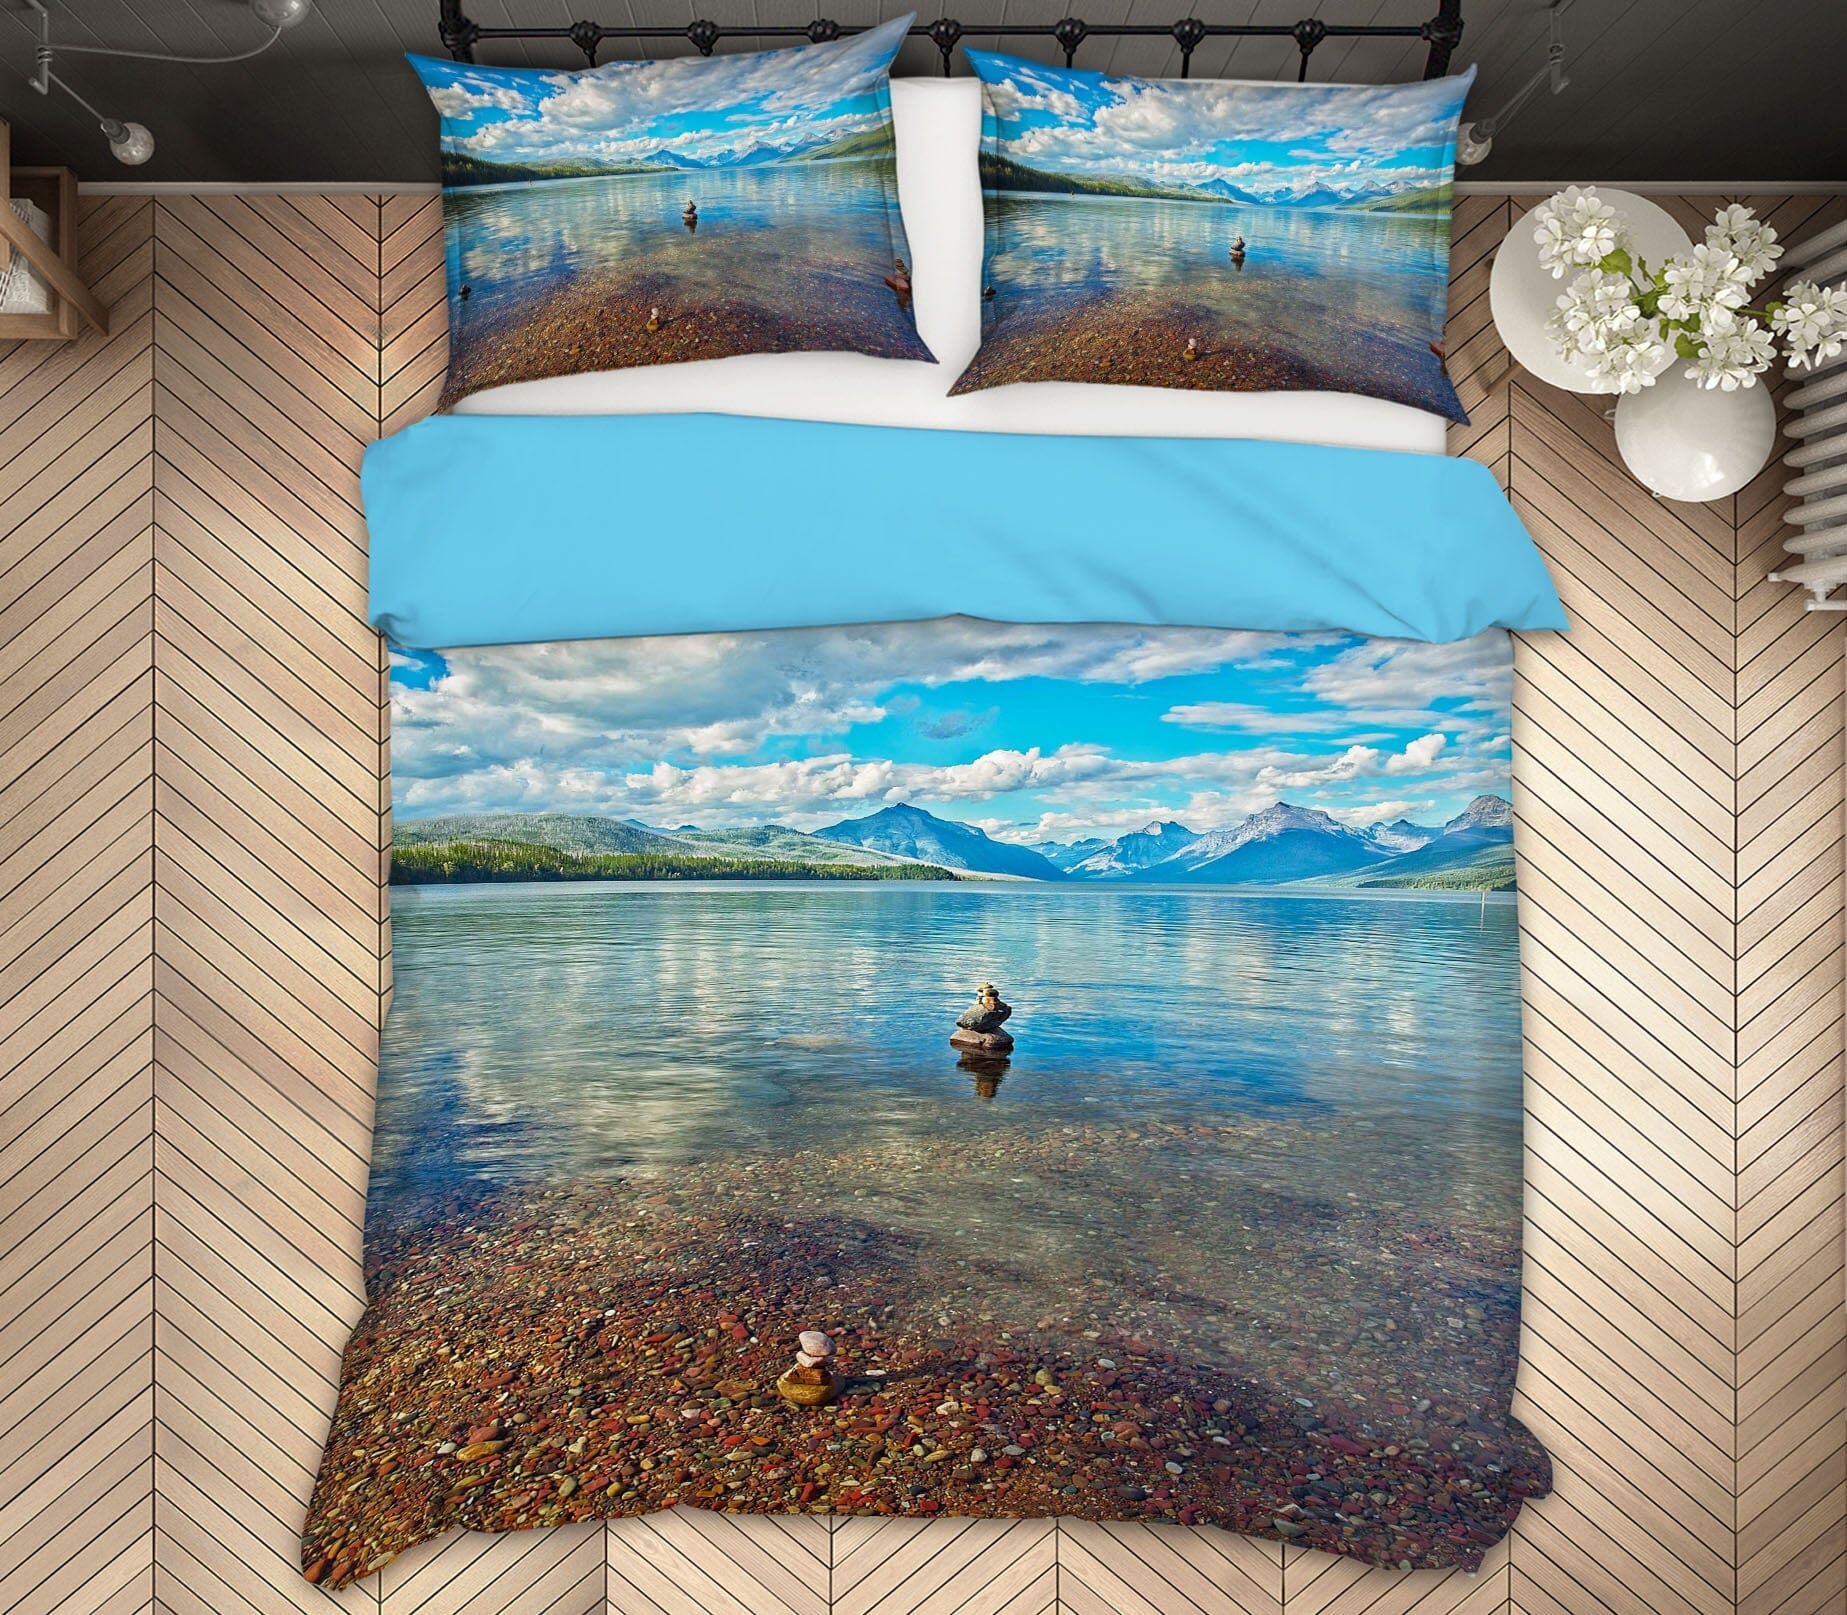 3D Clear Lake 2124 Kathy Barefield Bedding Bed Pillowcases Quilt Quiet Covers AJ Creativity Home 